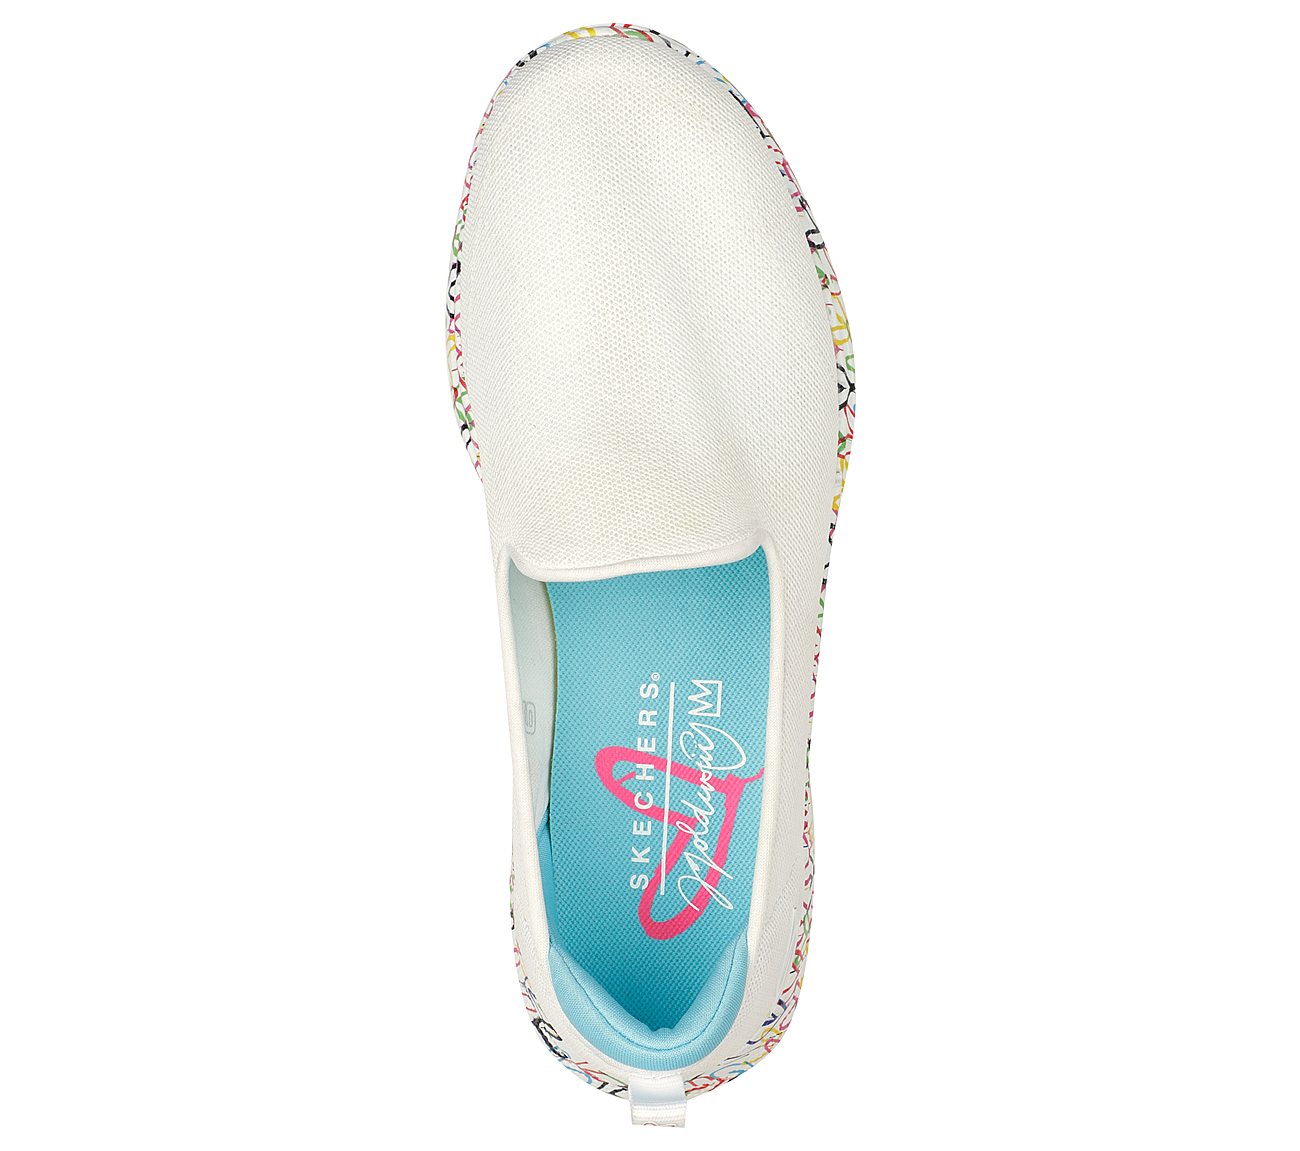 GO WALK 6 - ICONIC HEARTS, WHITE/MULTI Footwear Top View